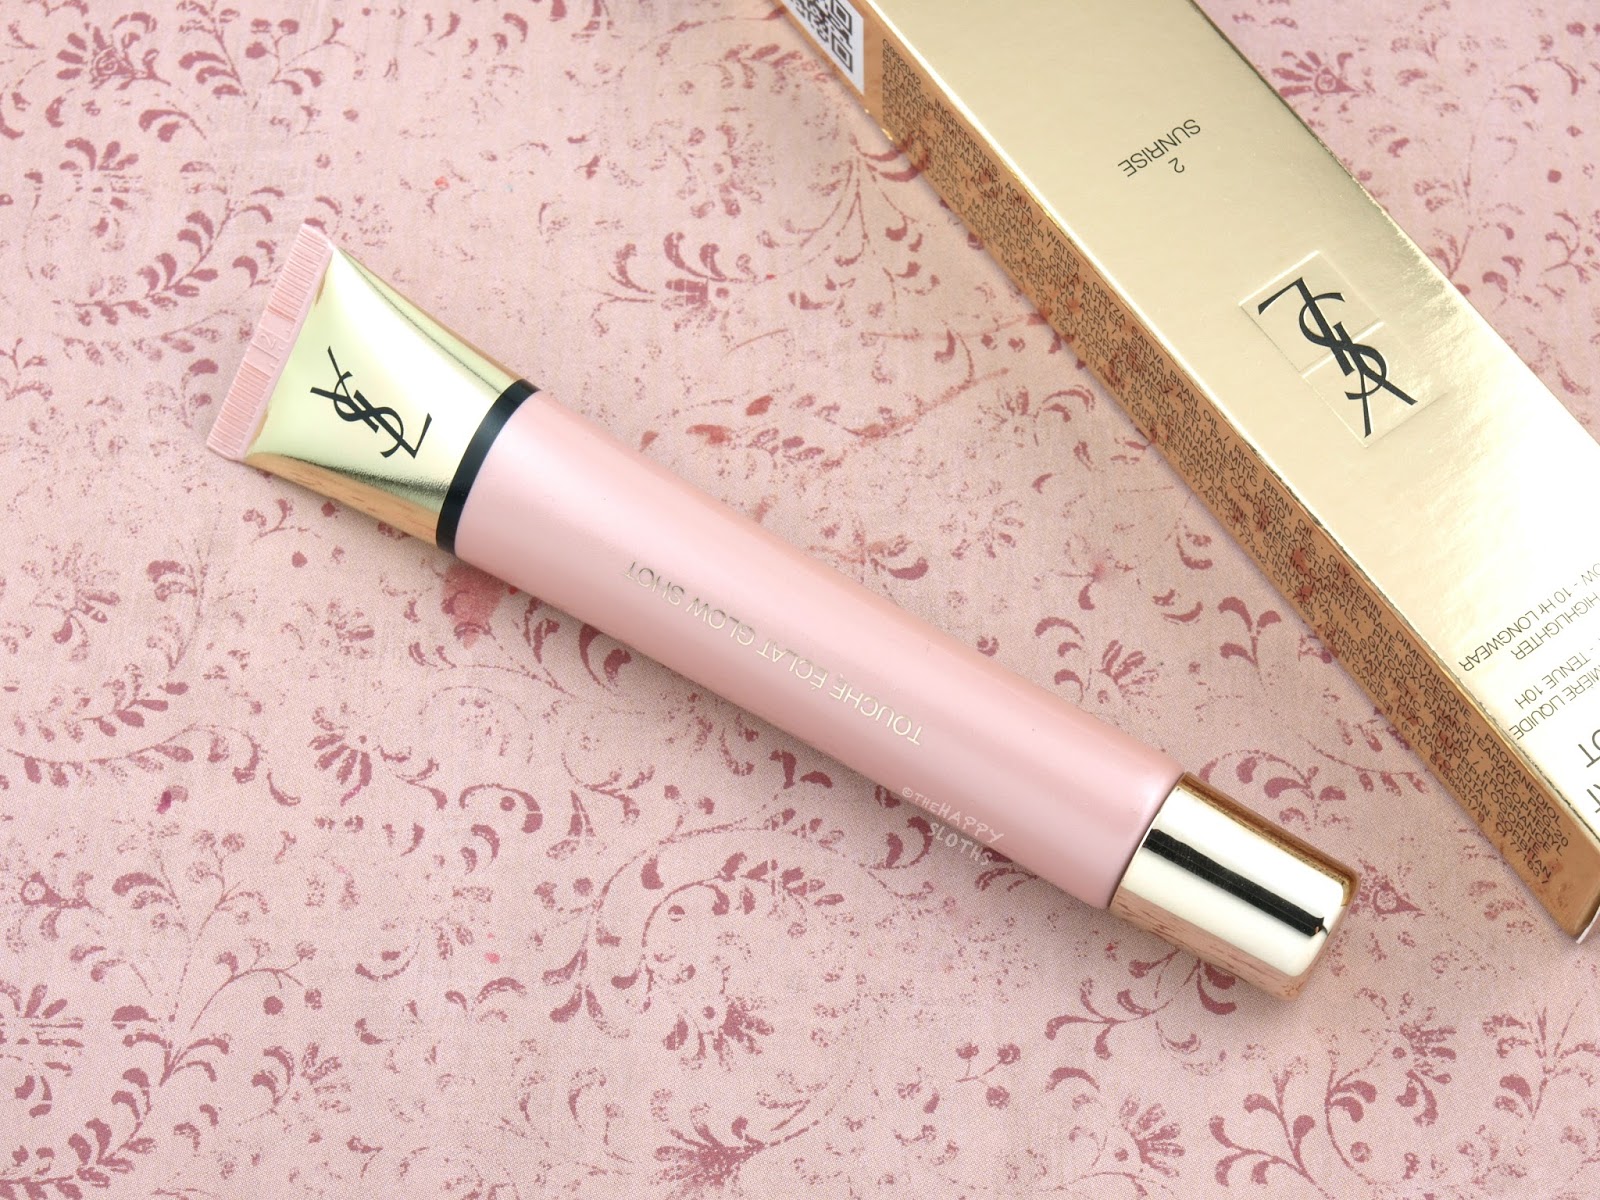 Yves Saint Laurent Touche Eclat Glow Shot Liquid Highlighter in "2 Sunrise": Review and Swatches